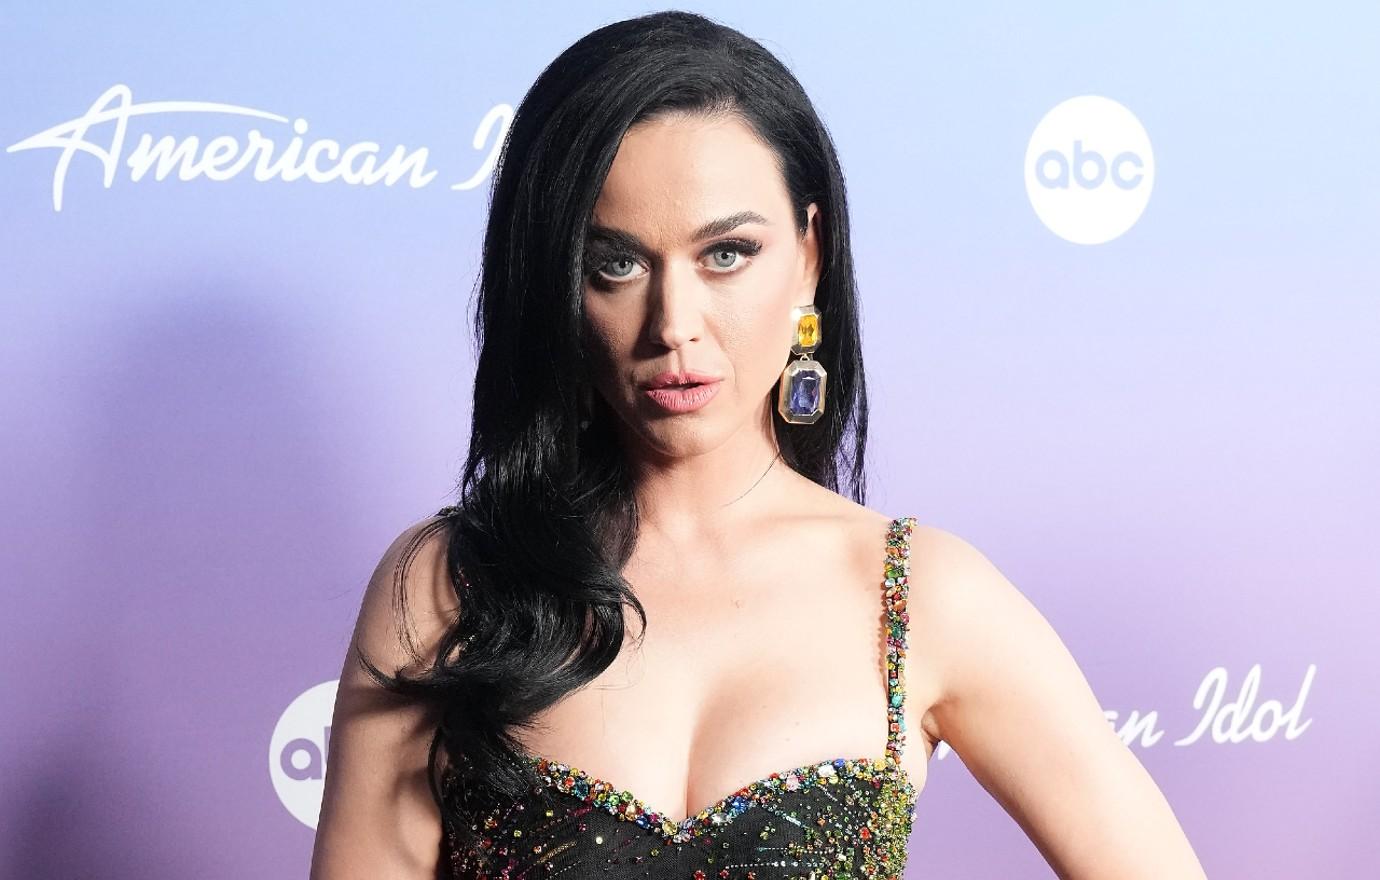 Katy Perry told to ditch spinning bra